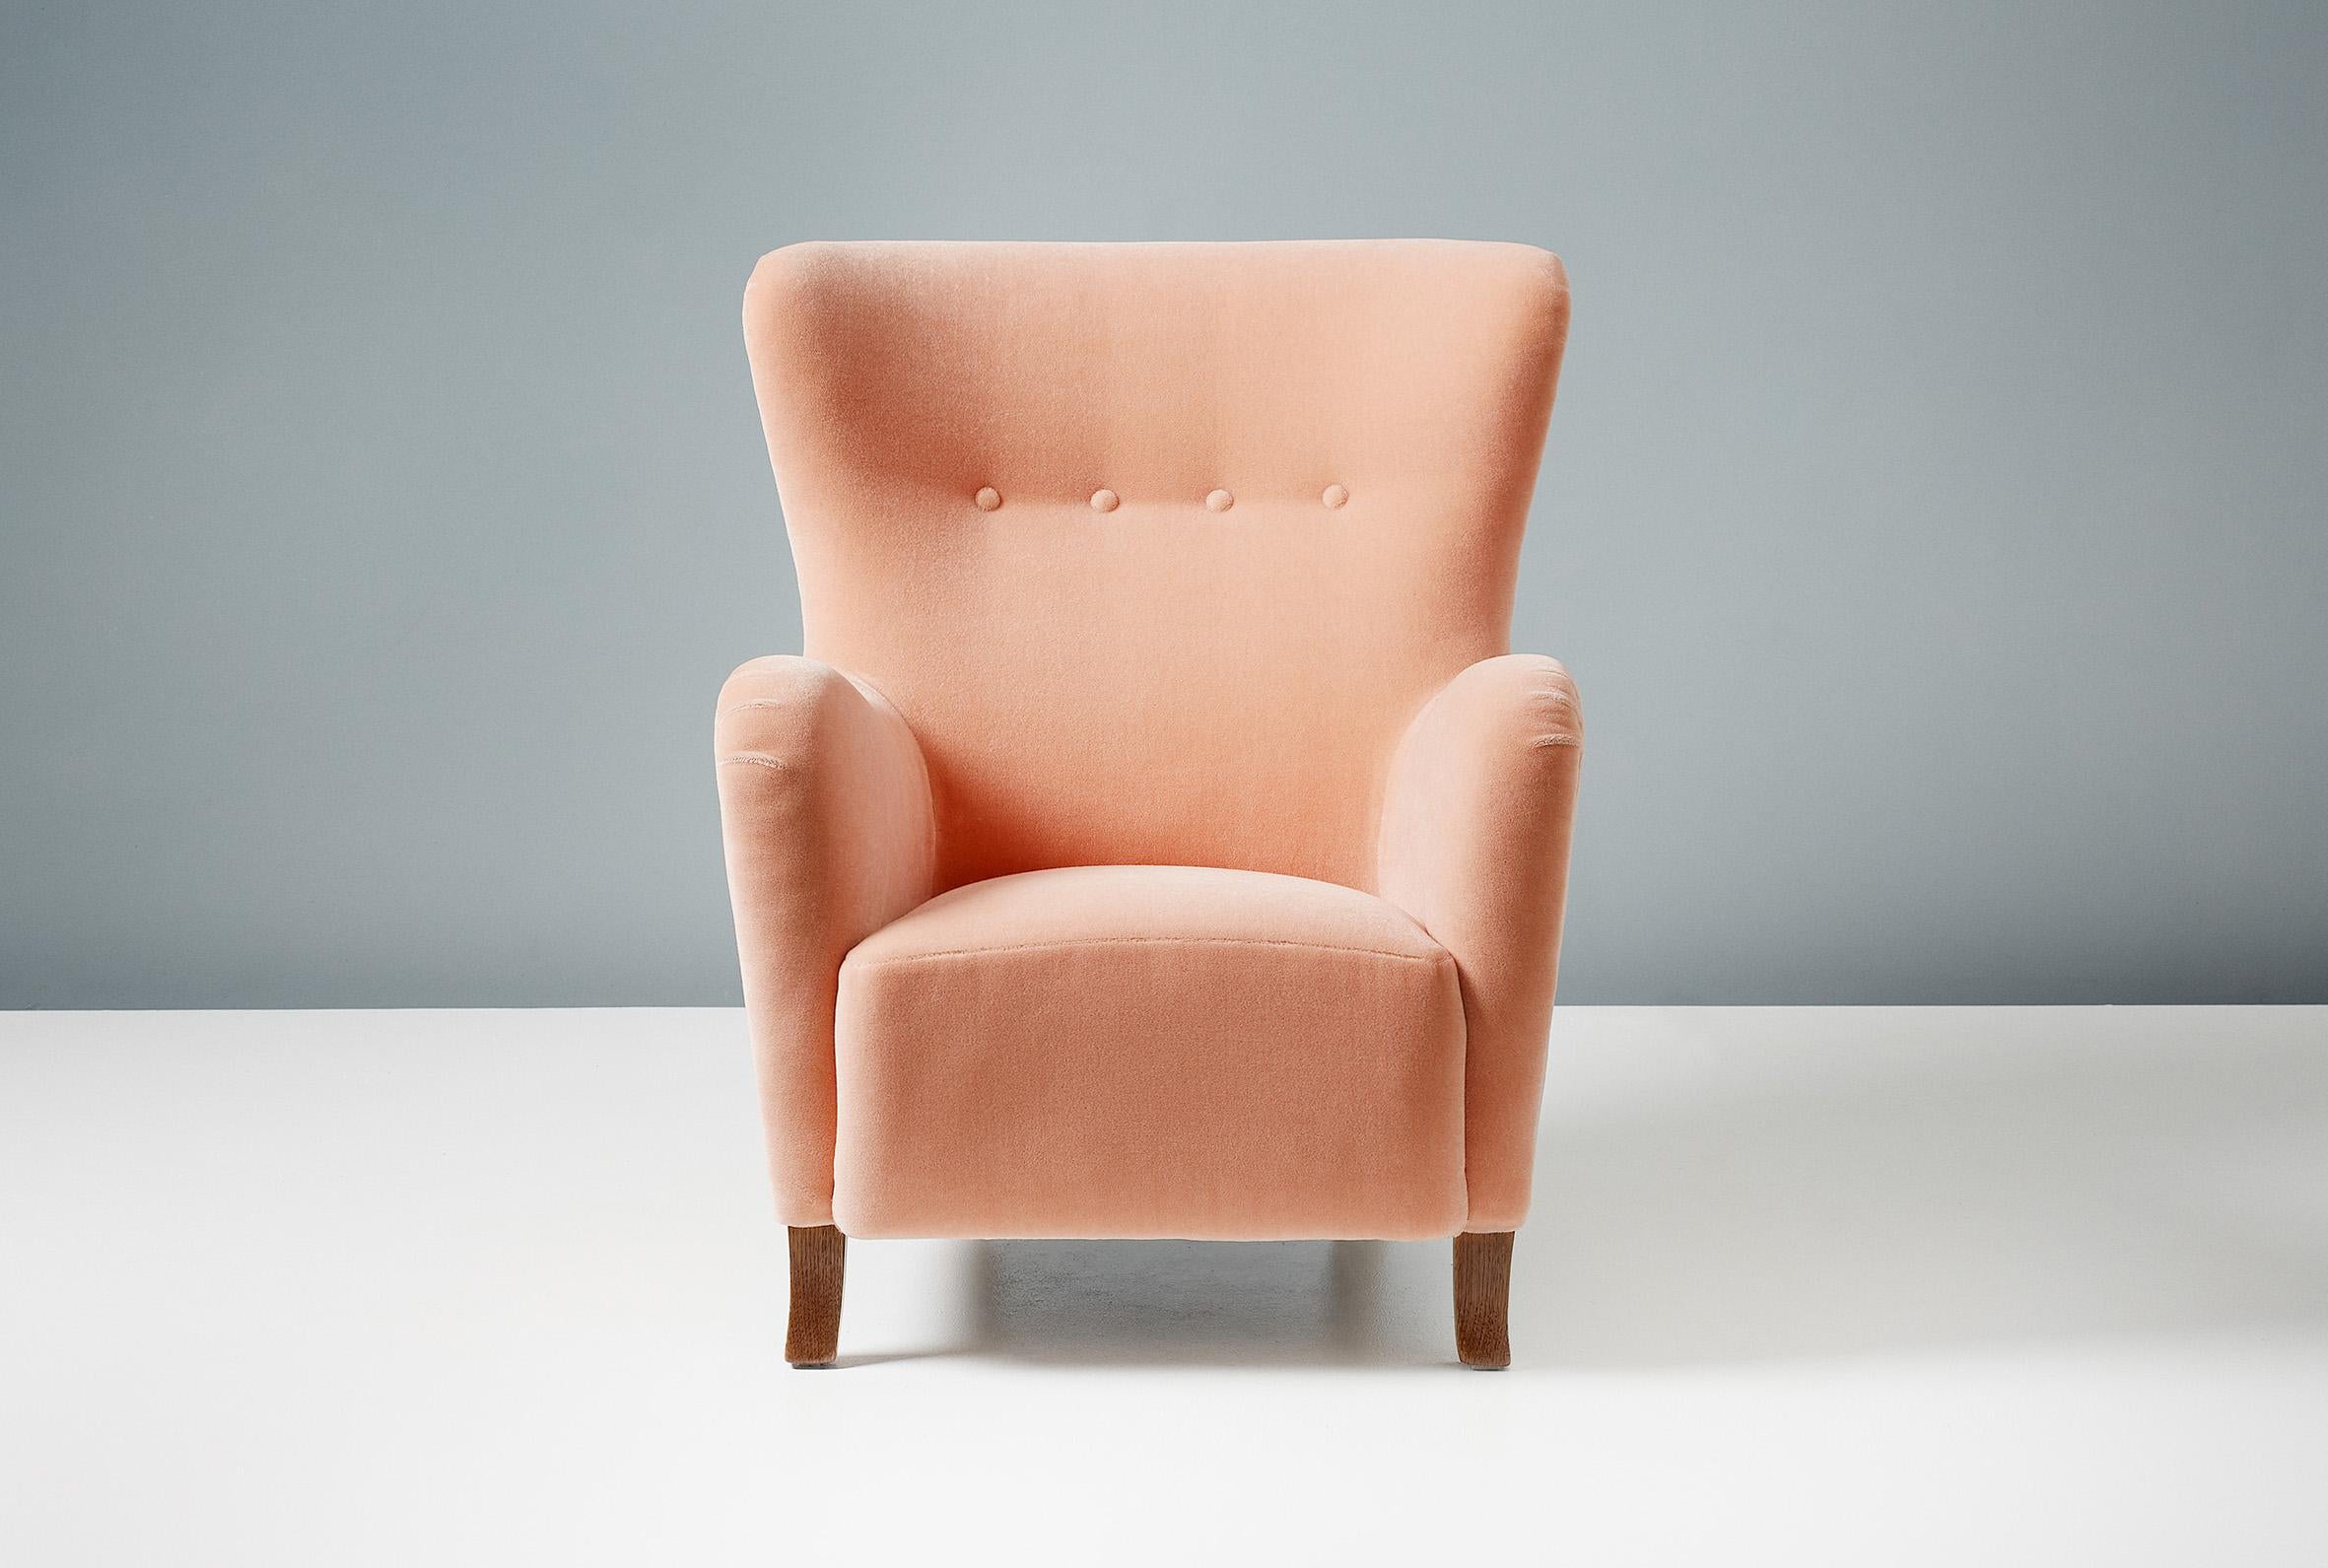 Dagmar design

Sampo wing chair

A custom-made wing chair developed & produced at our workshops in London using the highest quality materials. The frame is built from solid tulipwood with a fully sprung seat. This example is upholstered in a